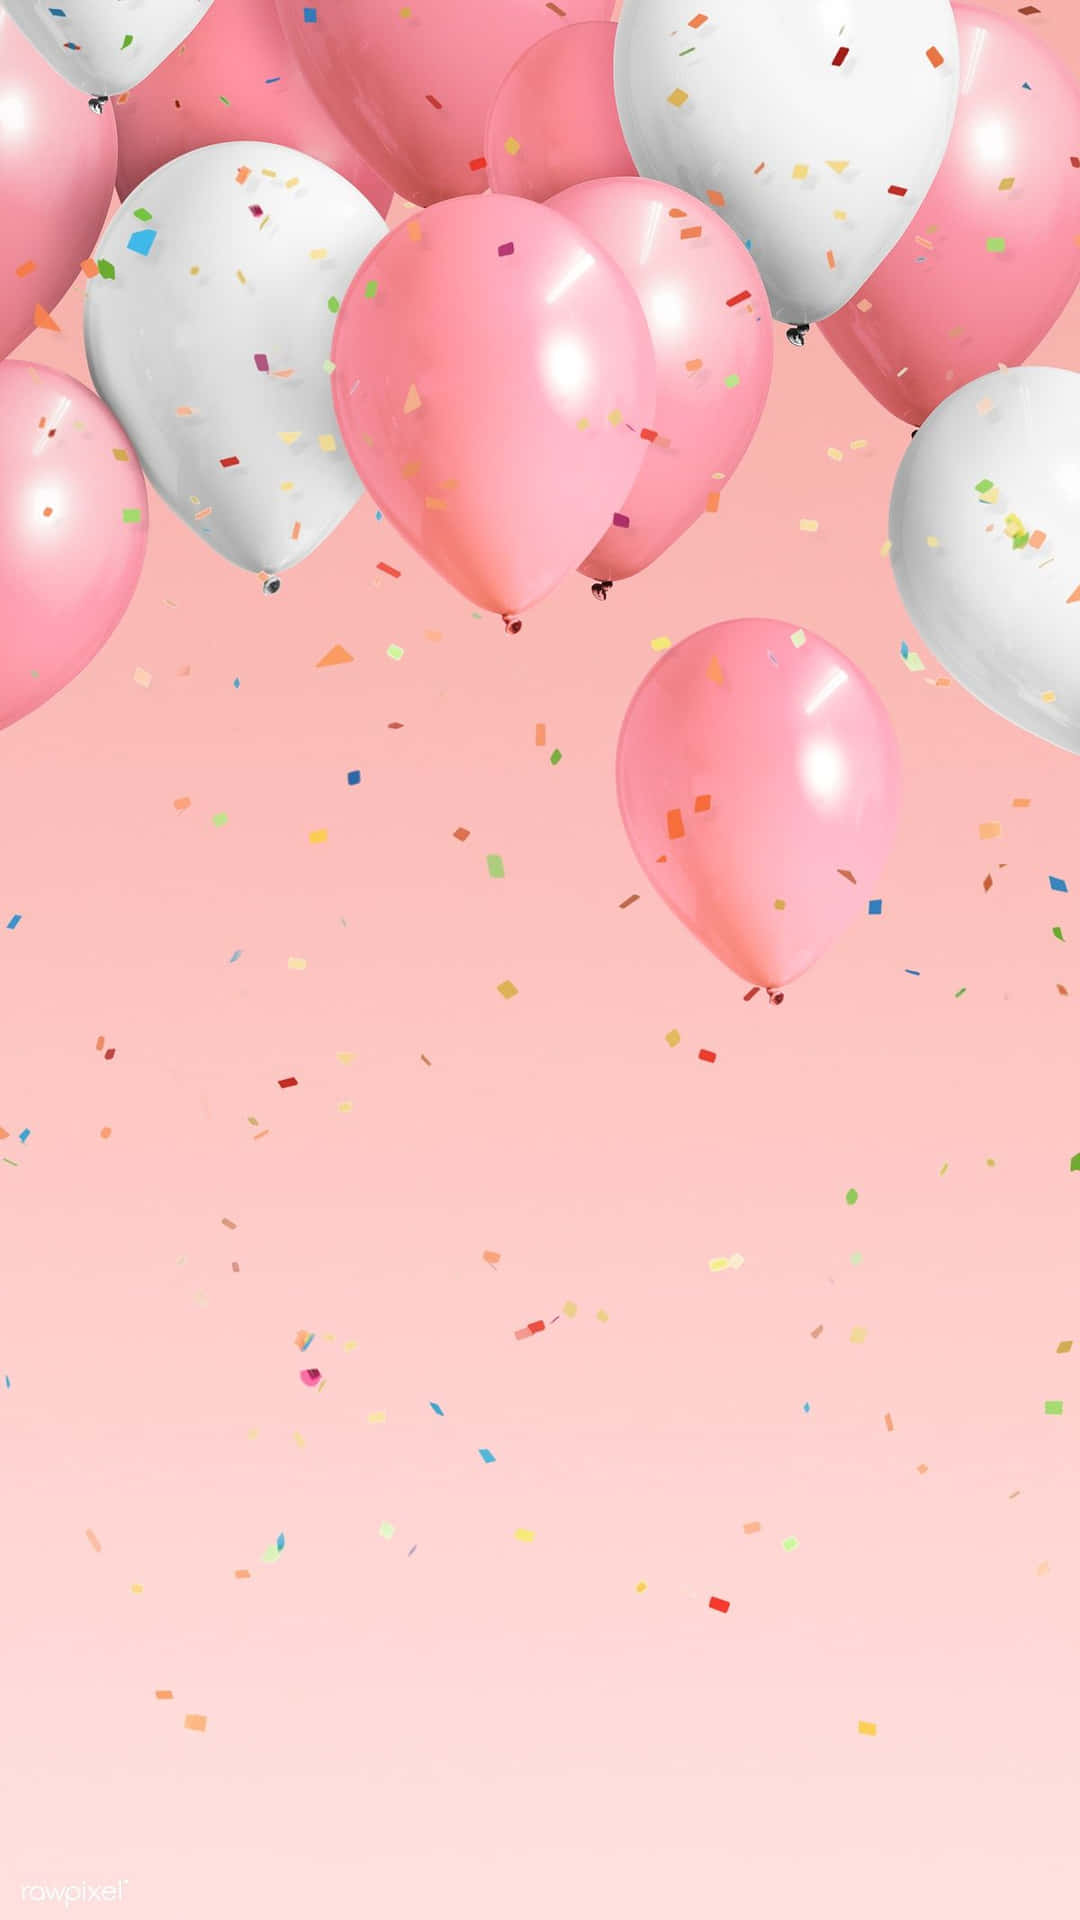 Pink And White Balloons Floating In The Air